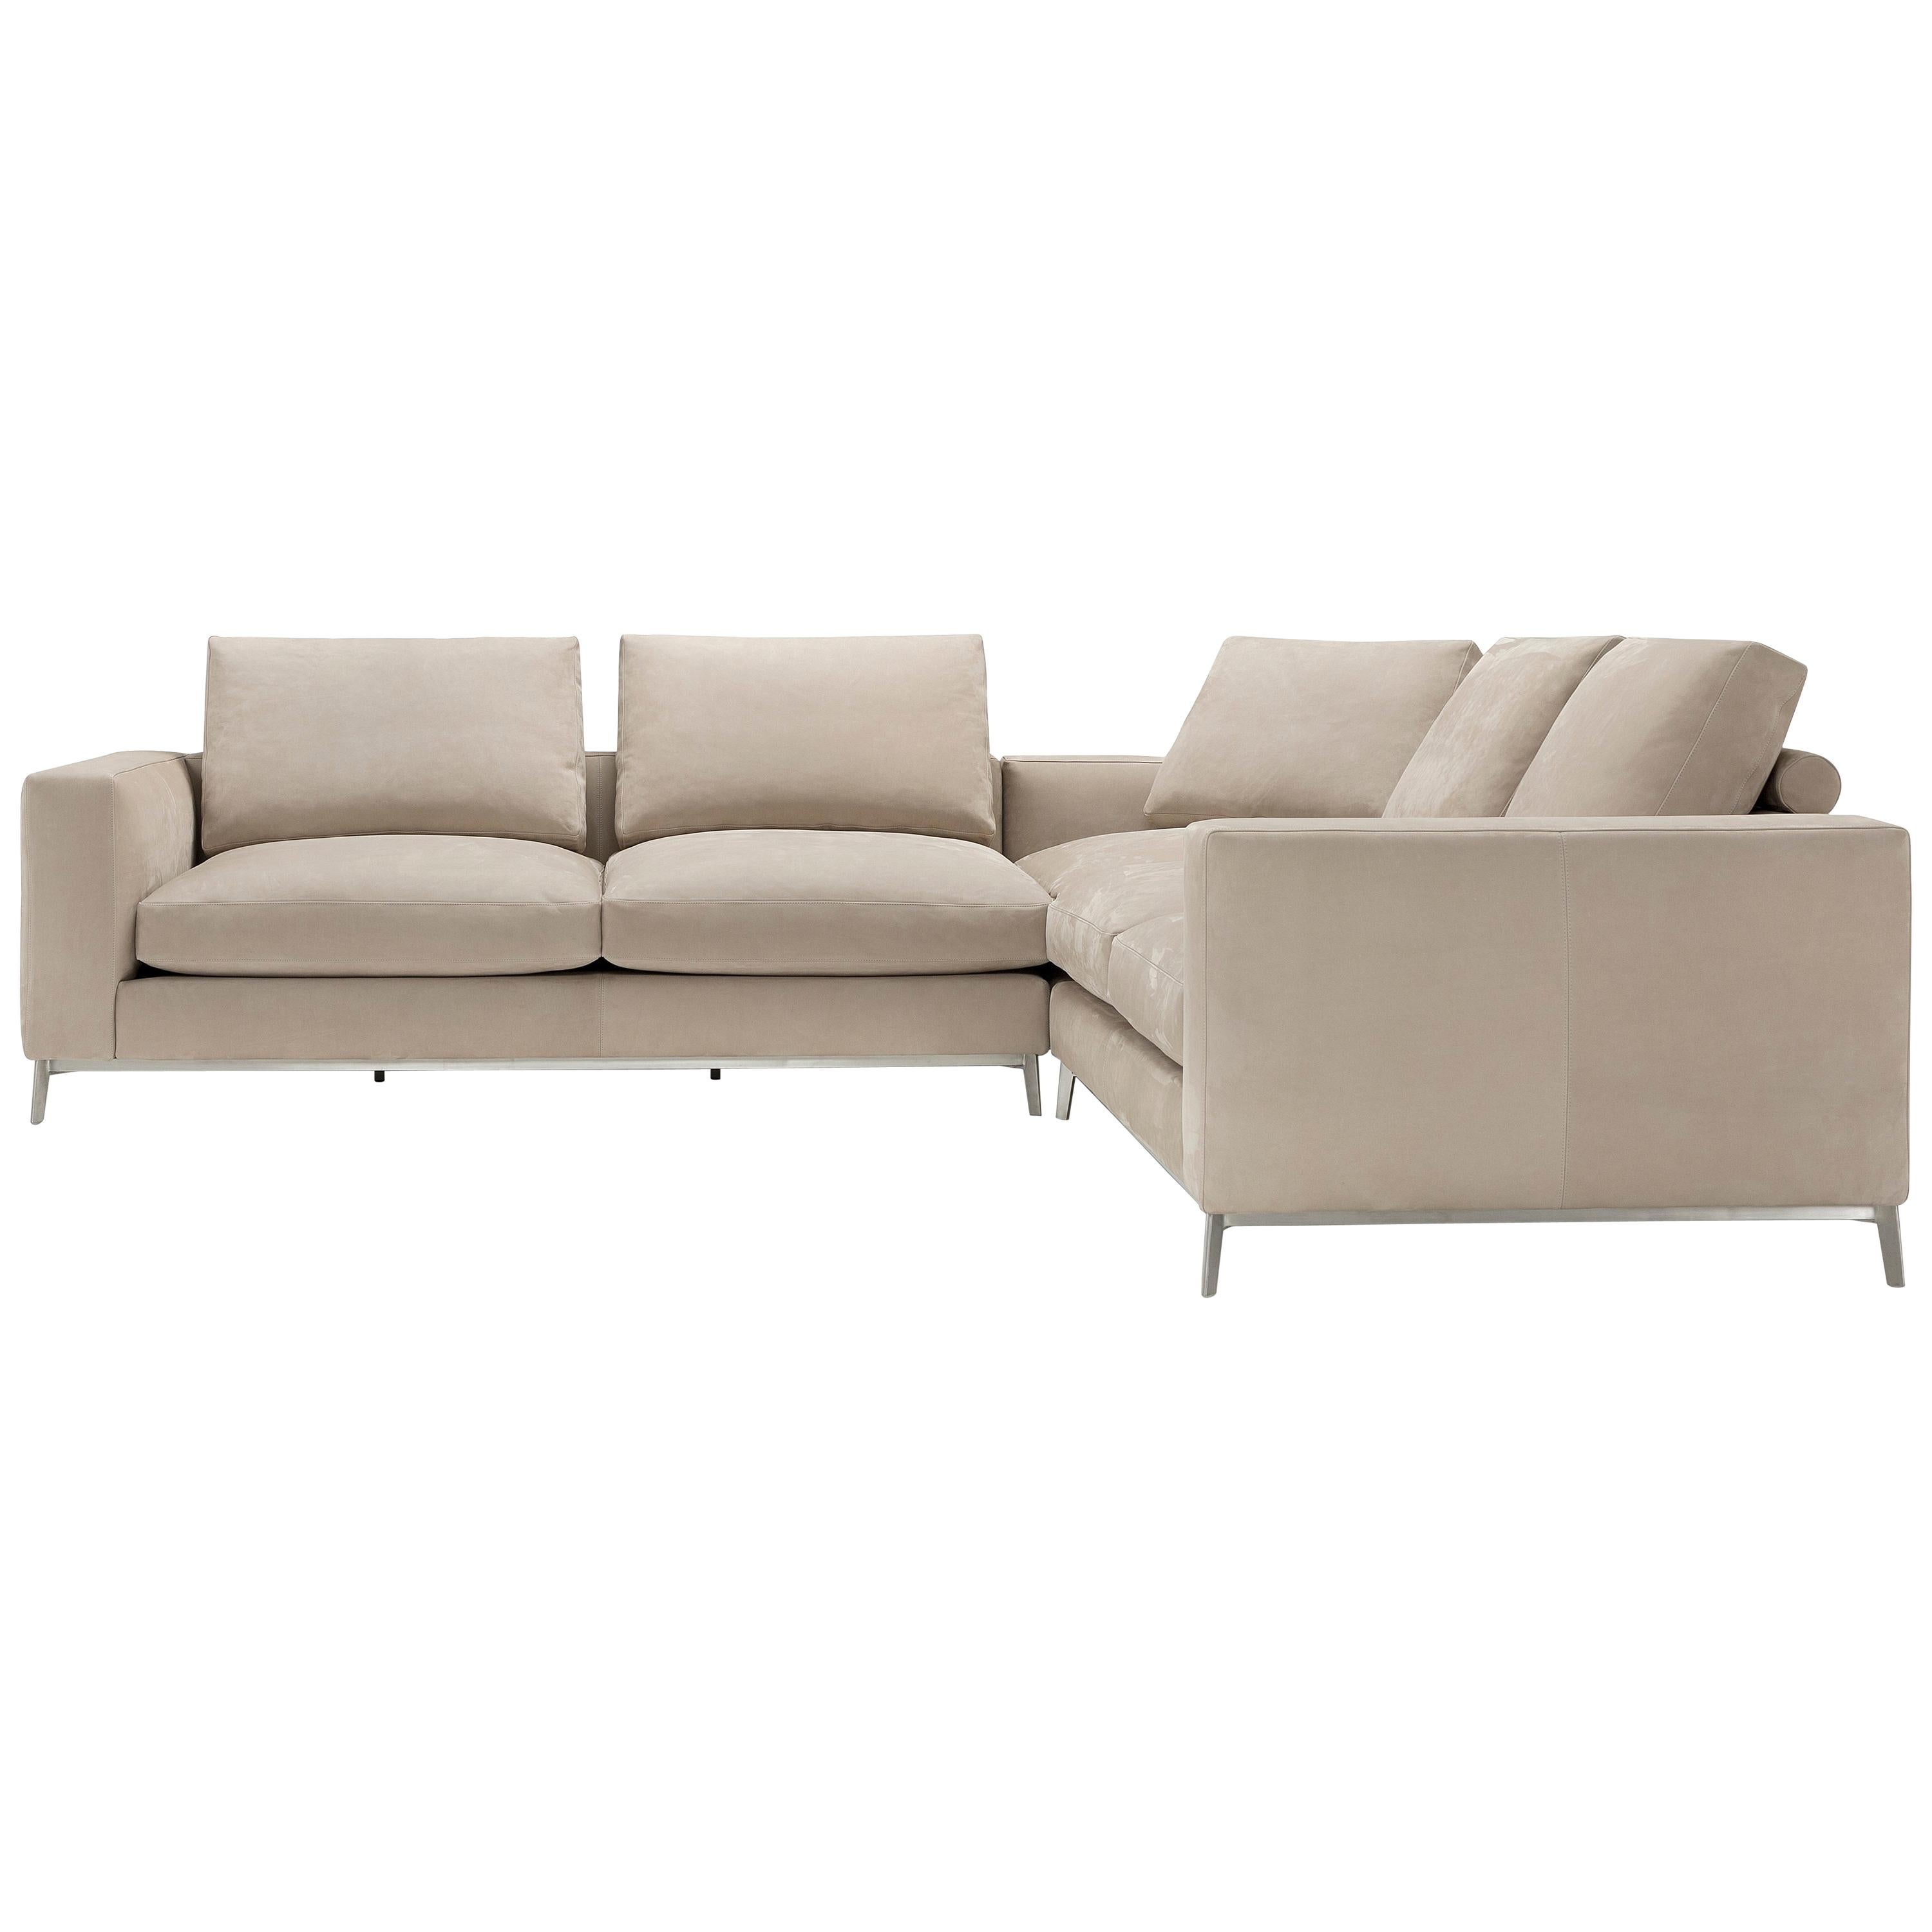 Amura 'Dorsey' Composition Sofa in Beige Leather by Amura Lab For Sale